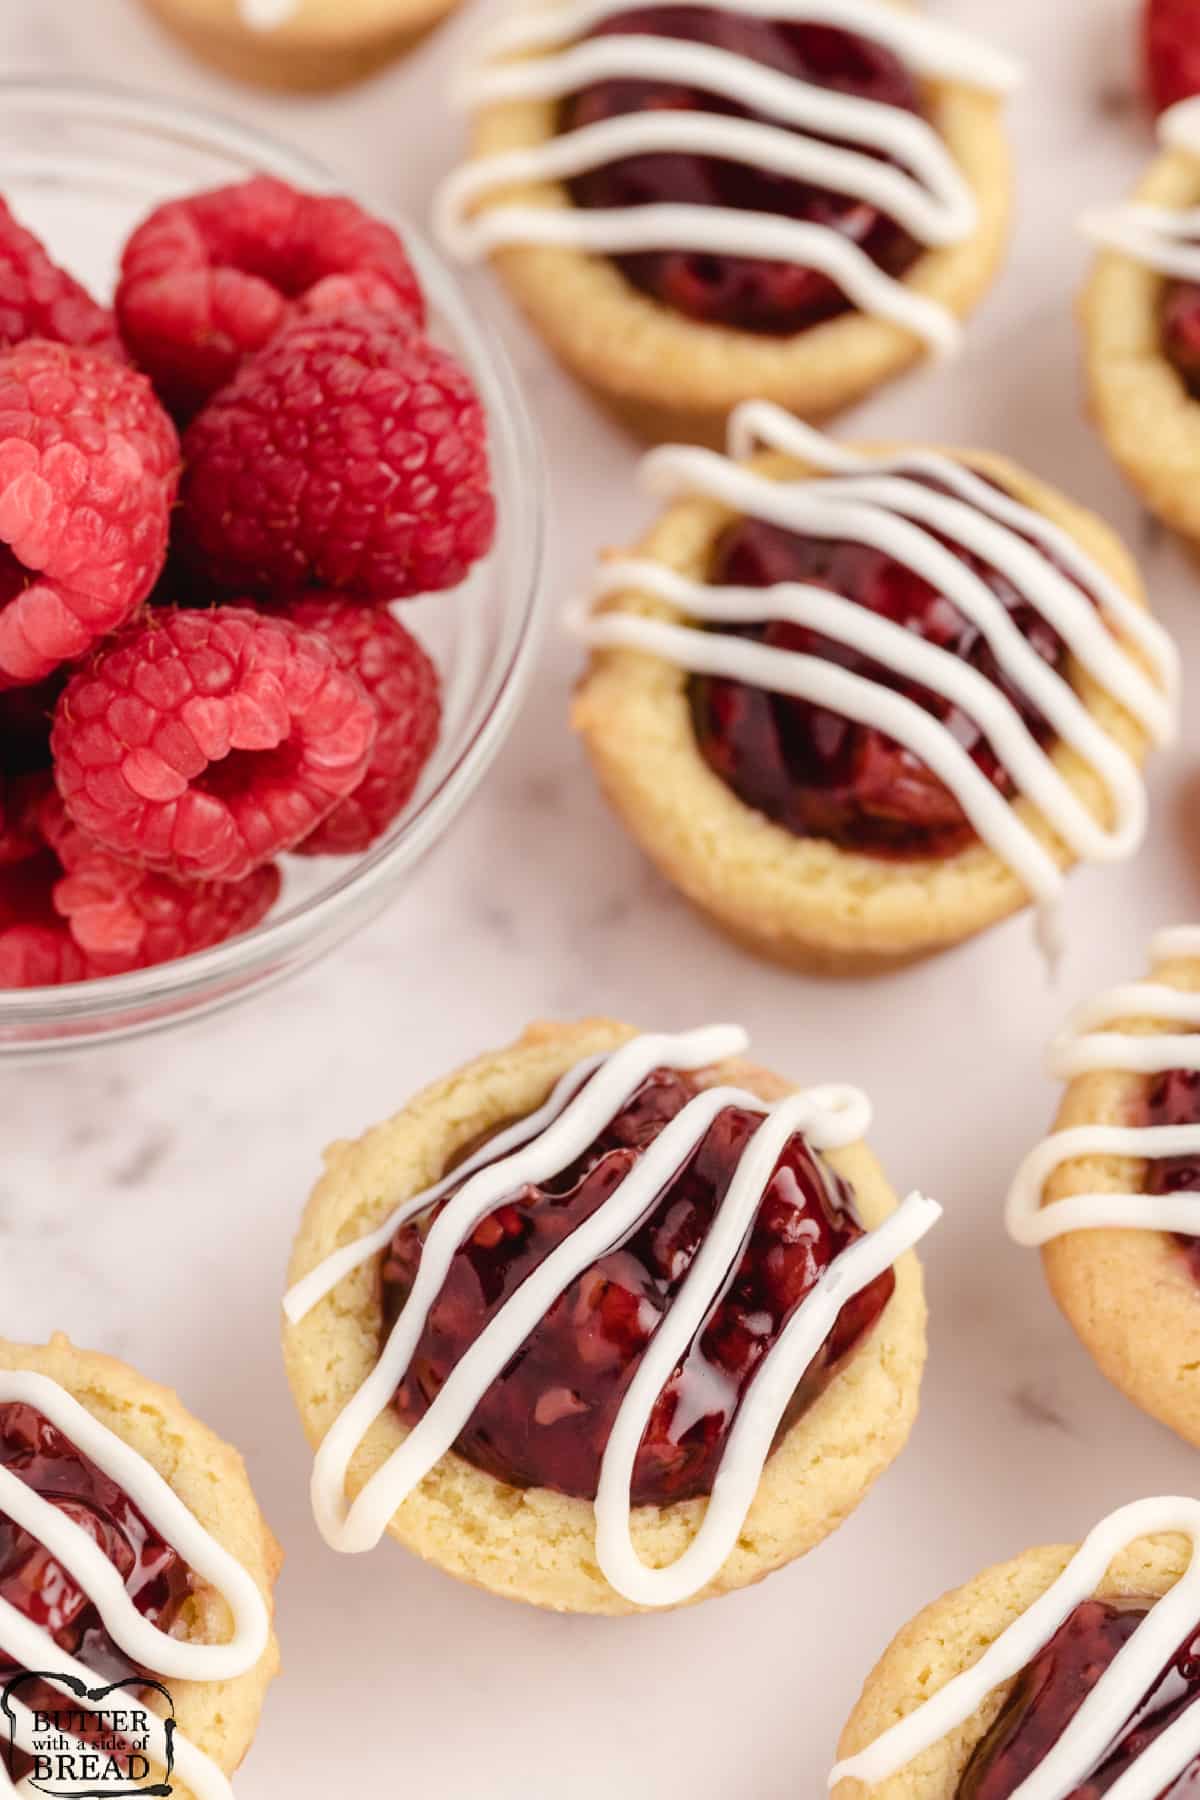 Lemon pudding cookie recipe made in a mini muffin tin with raspberry pie filling